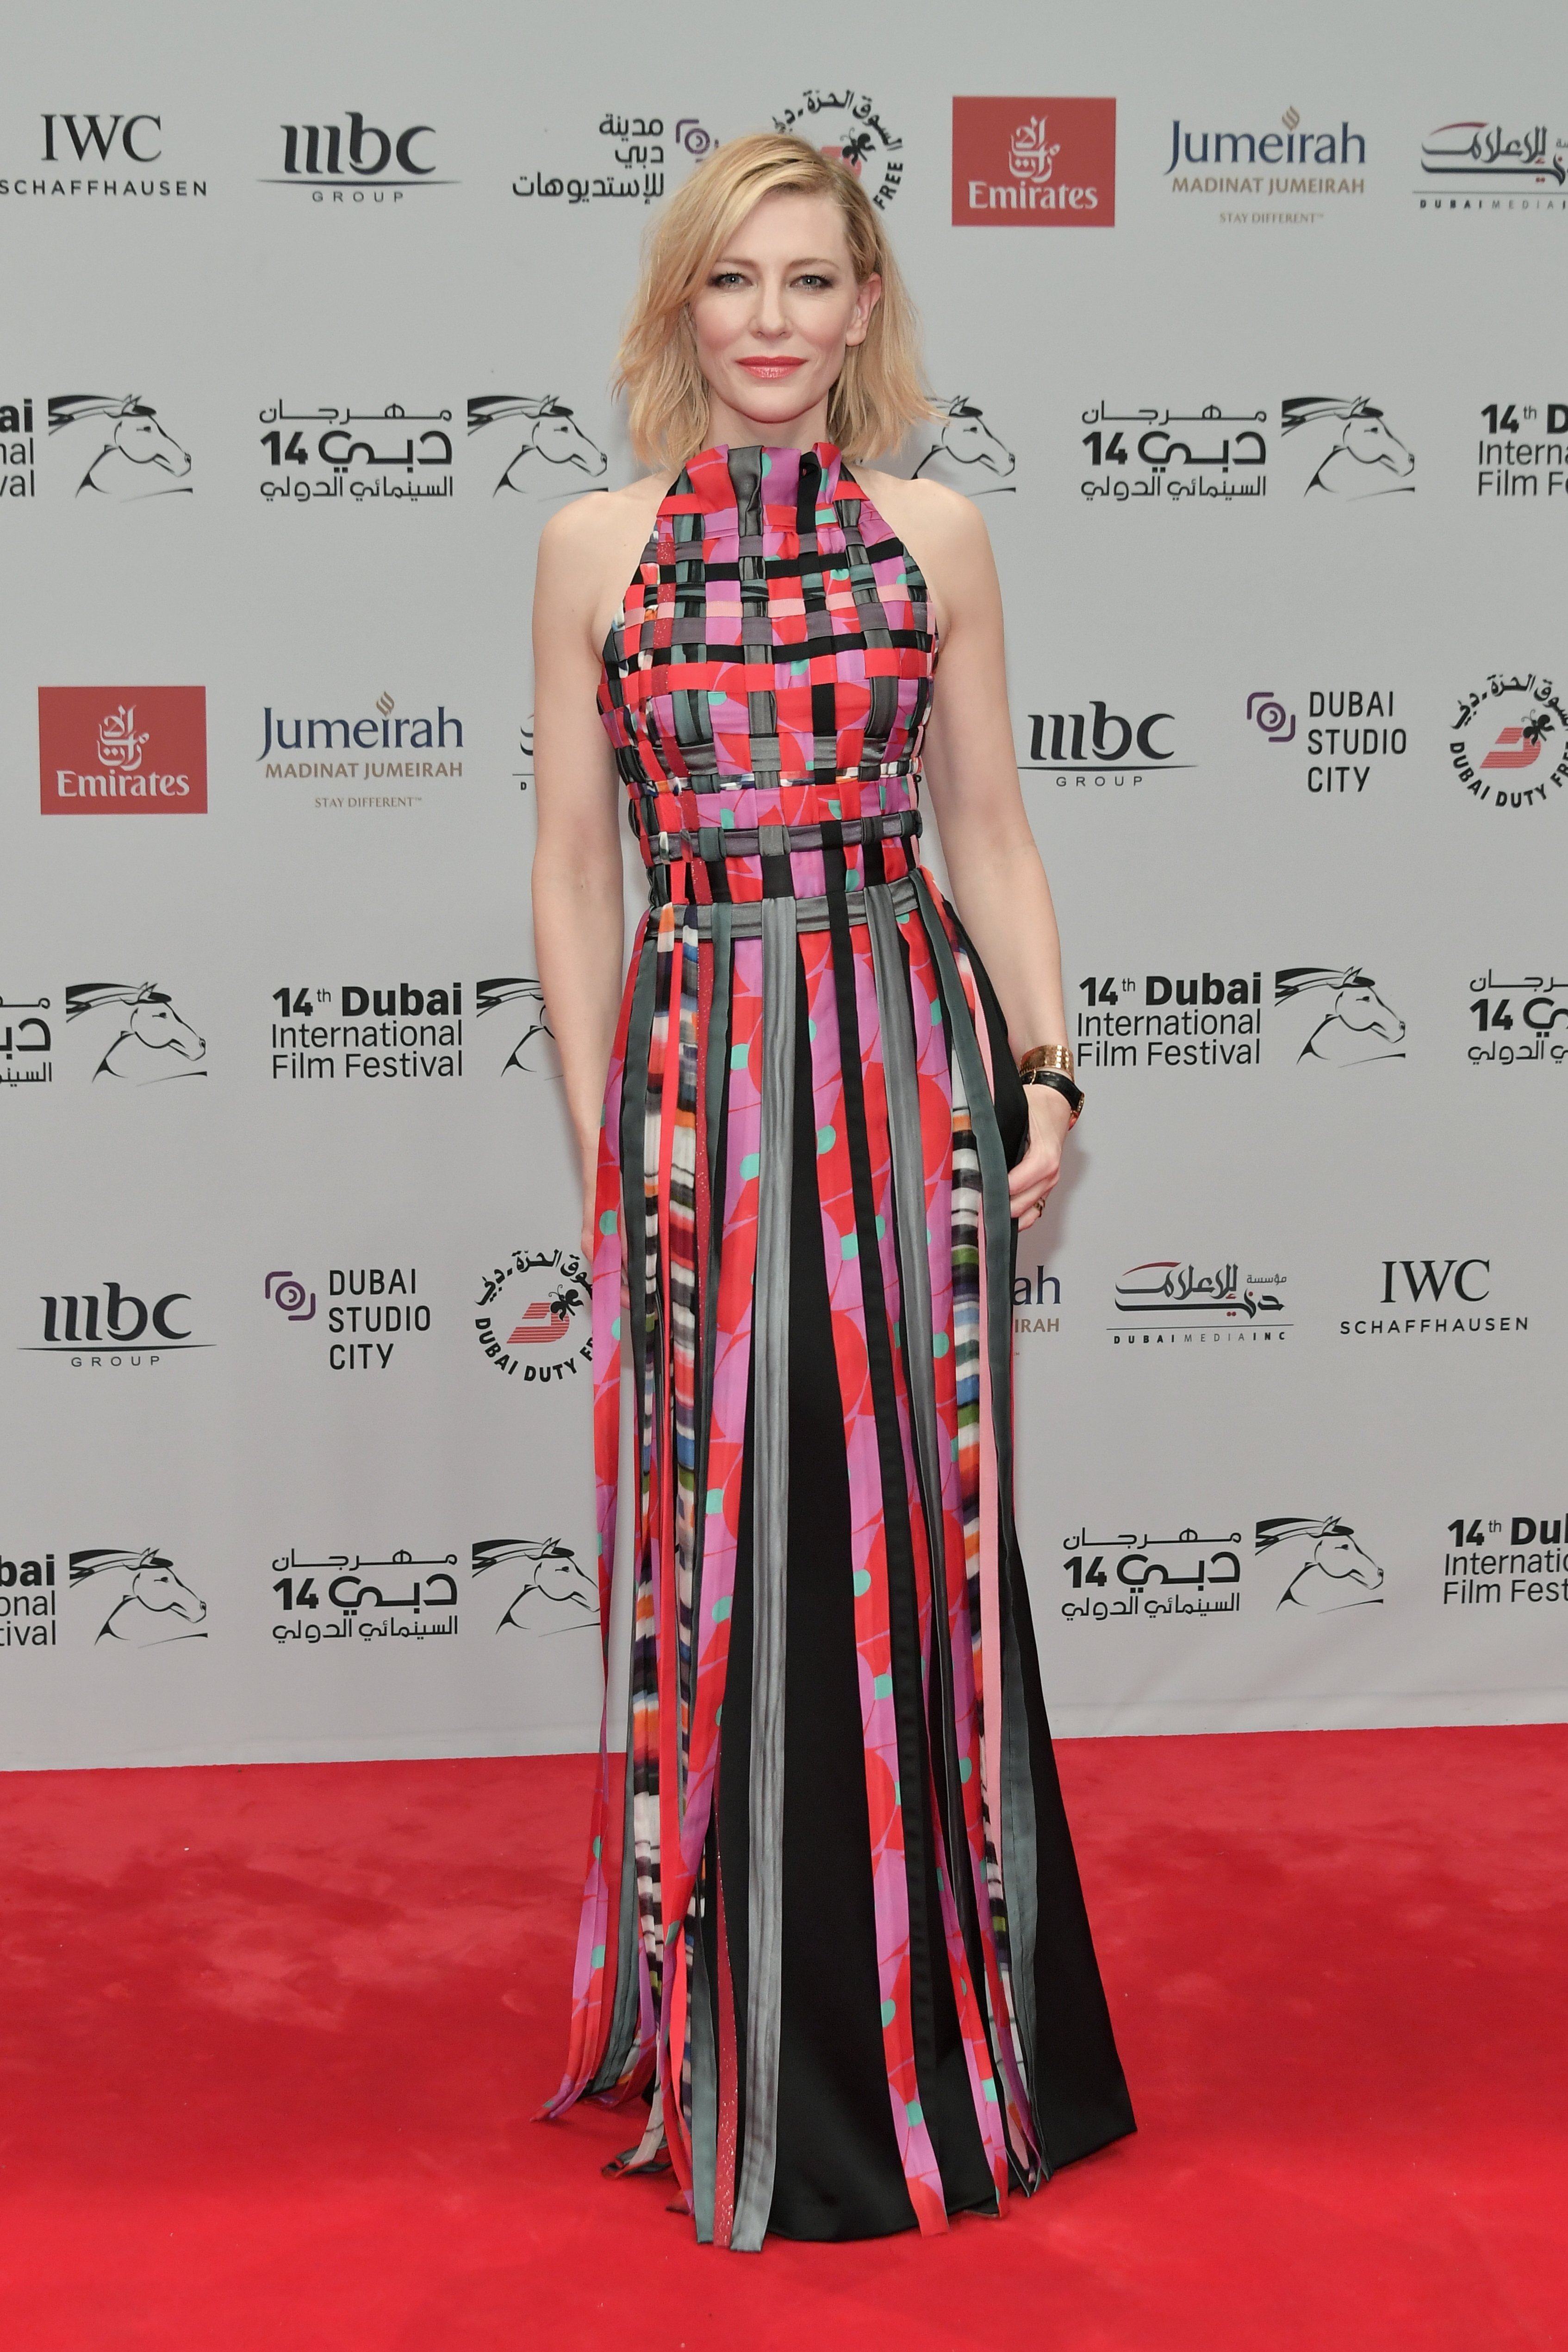 Cate Blanchett during the Opening Night Gala of the 14th annual Dubai International Film Festival held at the Madinat Jumeriah Complex on December 6, 2017 in Dubai, United Arab Emirates. | Source: Getty Images